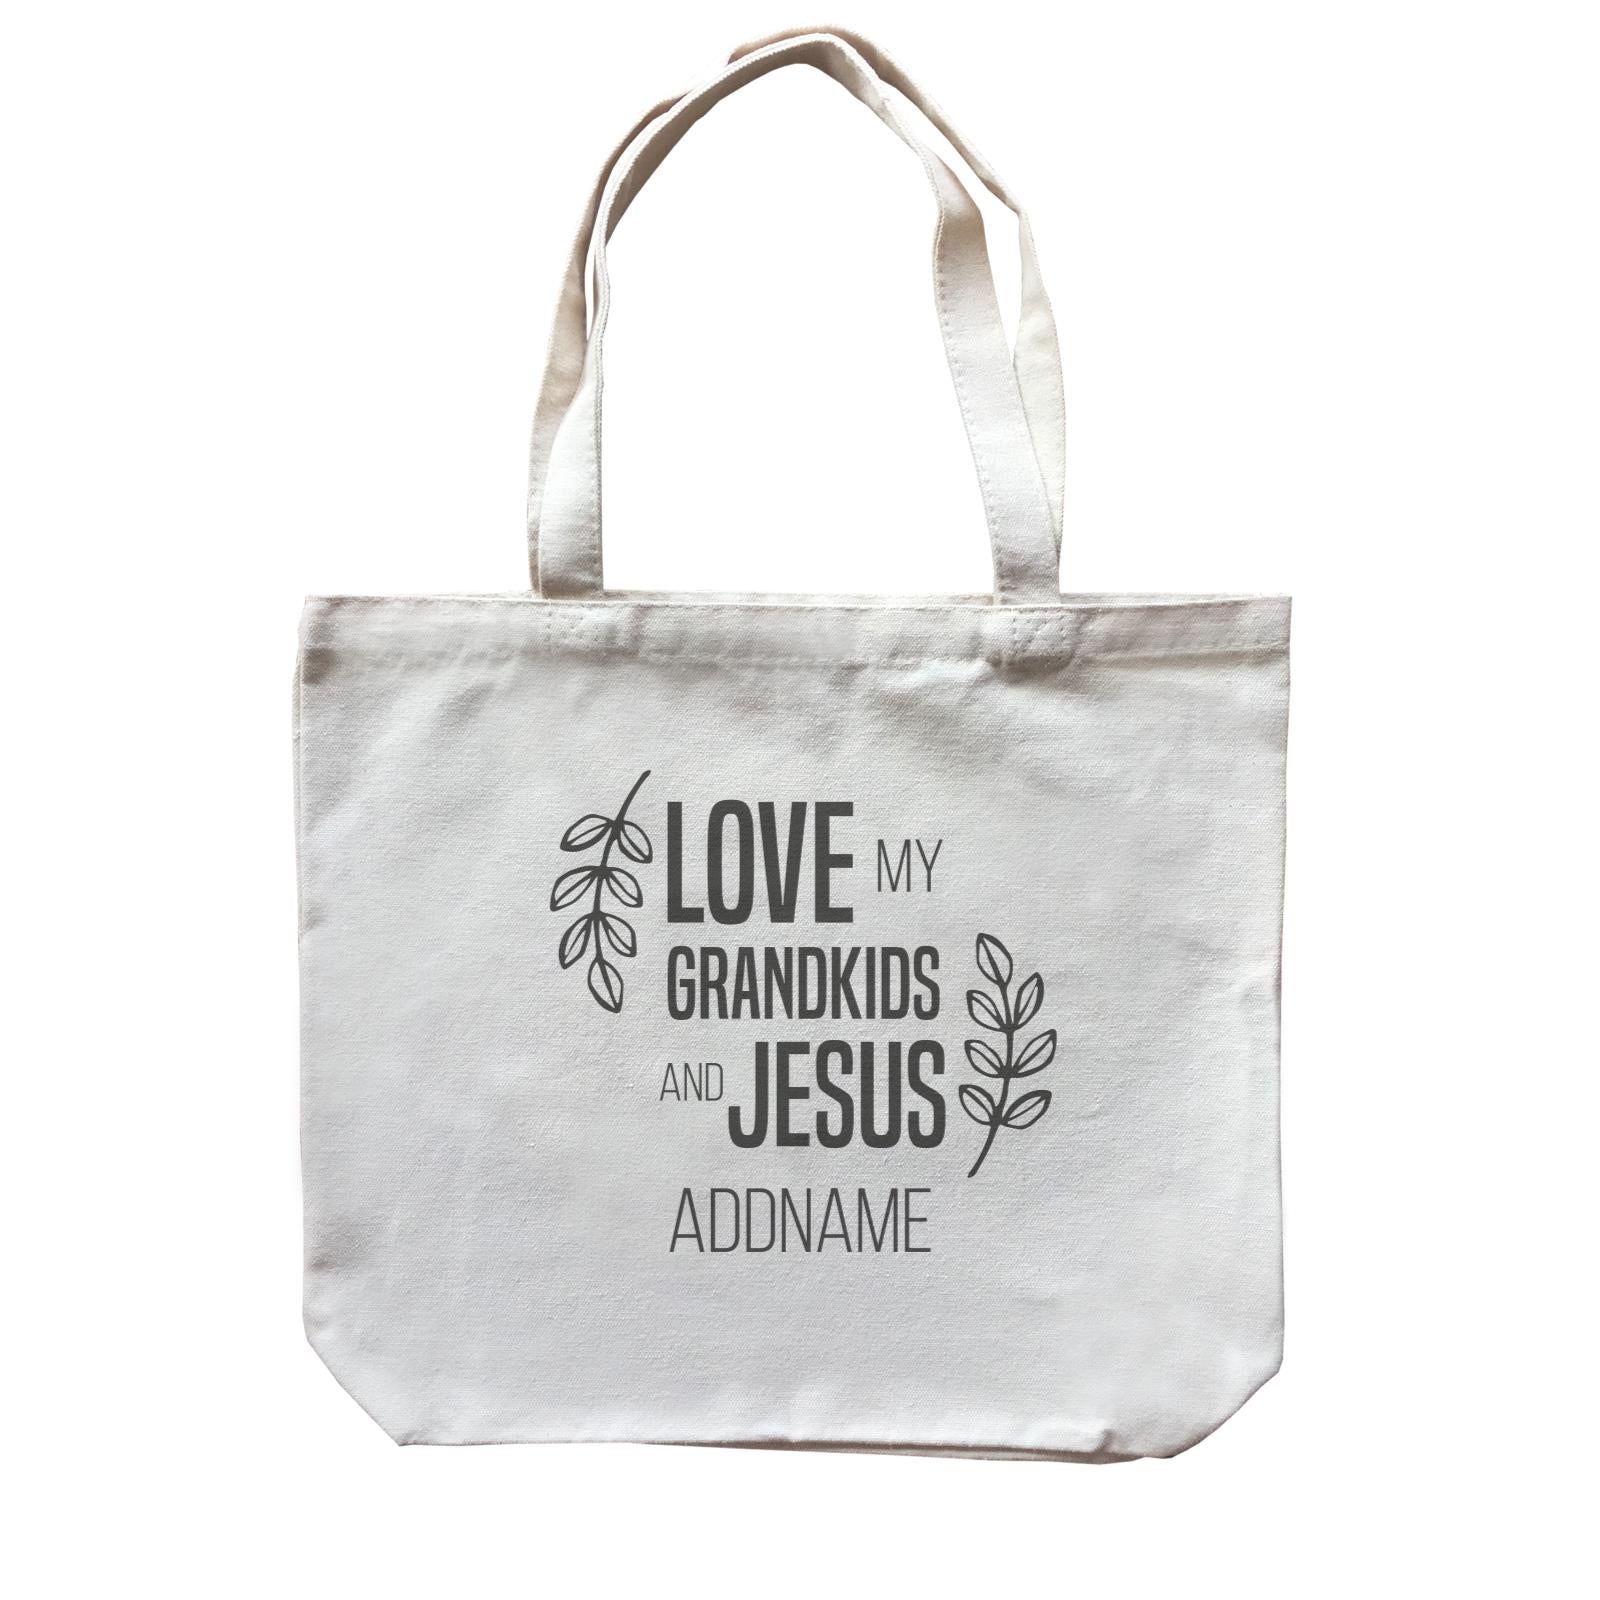 Christian Series Love My Grandkids And Jesus Addname Canvas Bag